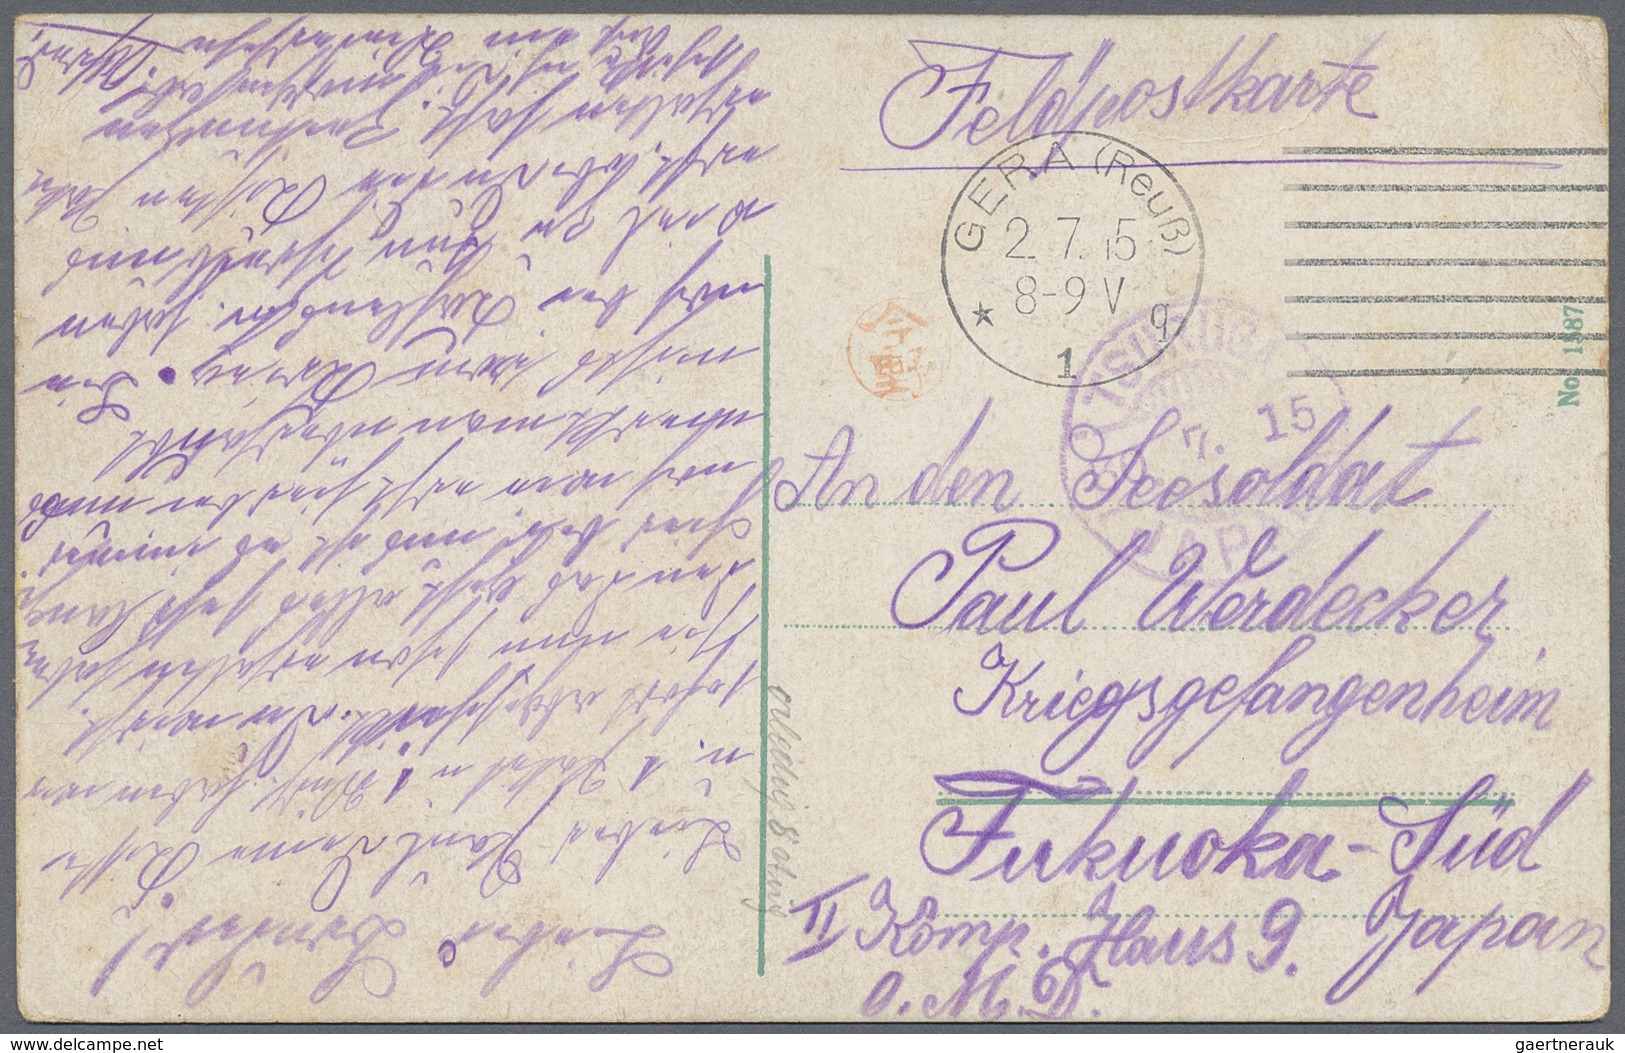 /Br Lagerpost Tsingtau: Fukuoka, 1915/18, Ppc (11) Or Cover (1) Inc. Inbound Card From Germany 1915 (han - China (offices)